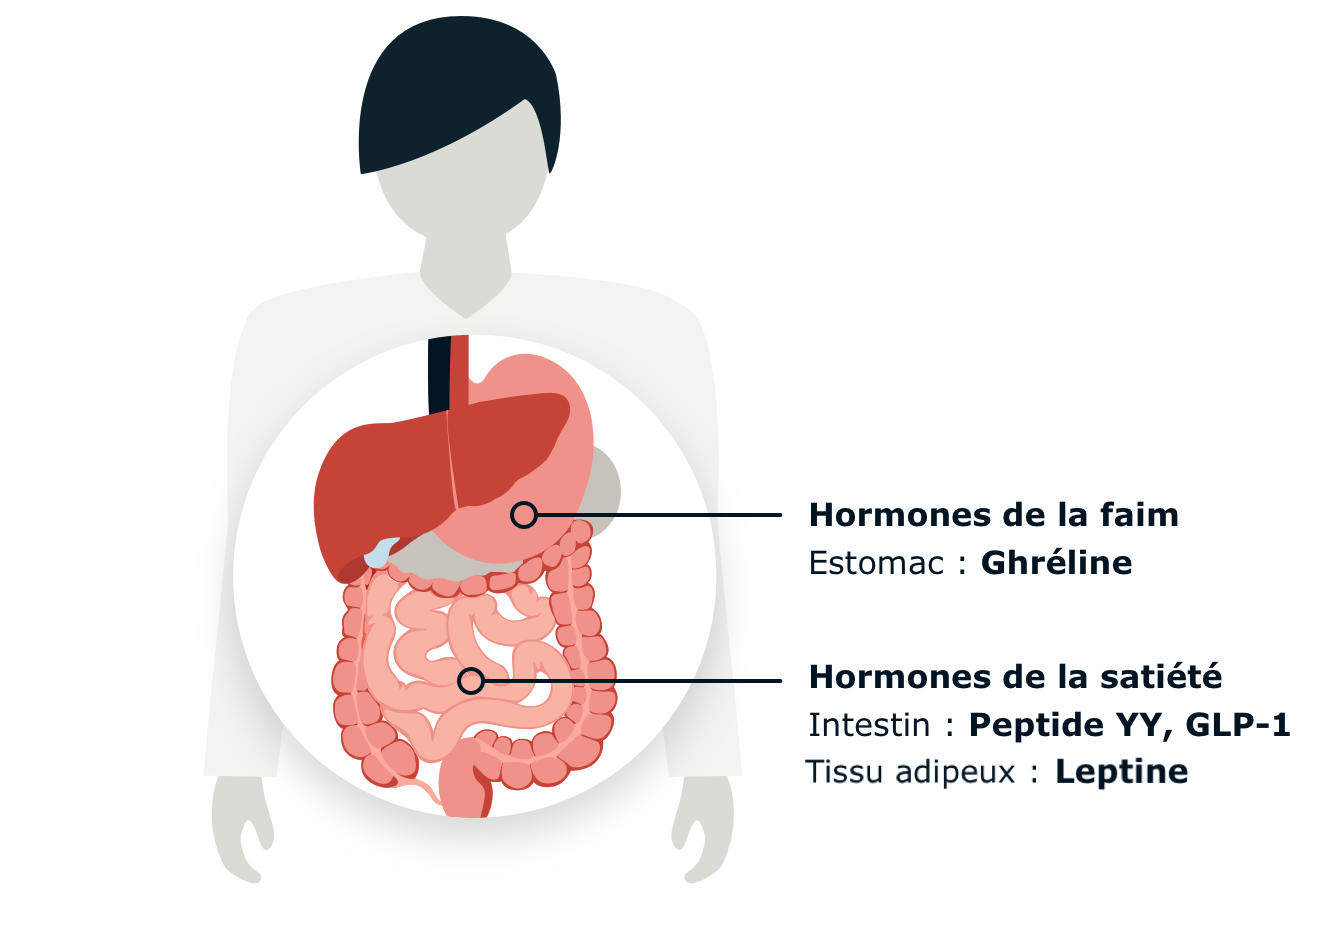 Infographic displaying the location of hunger and satiety hormones.